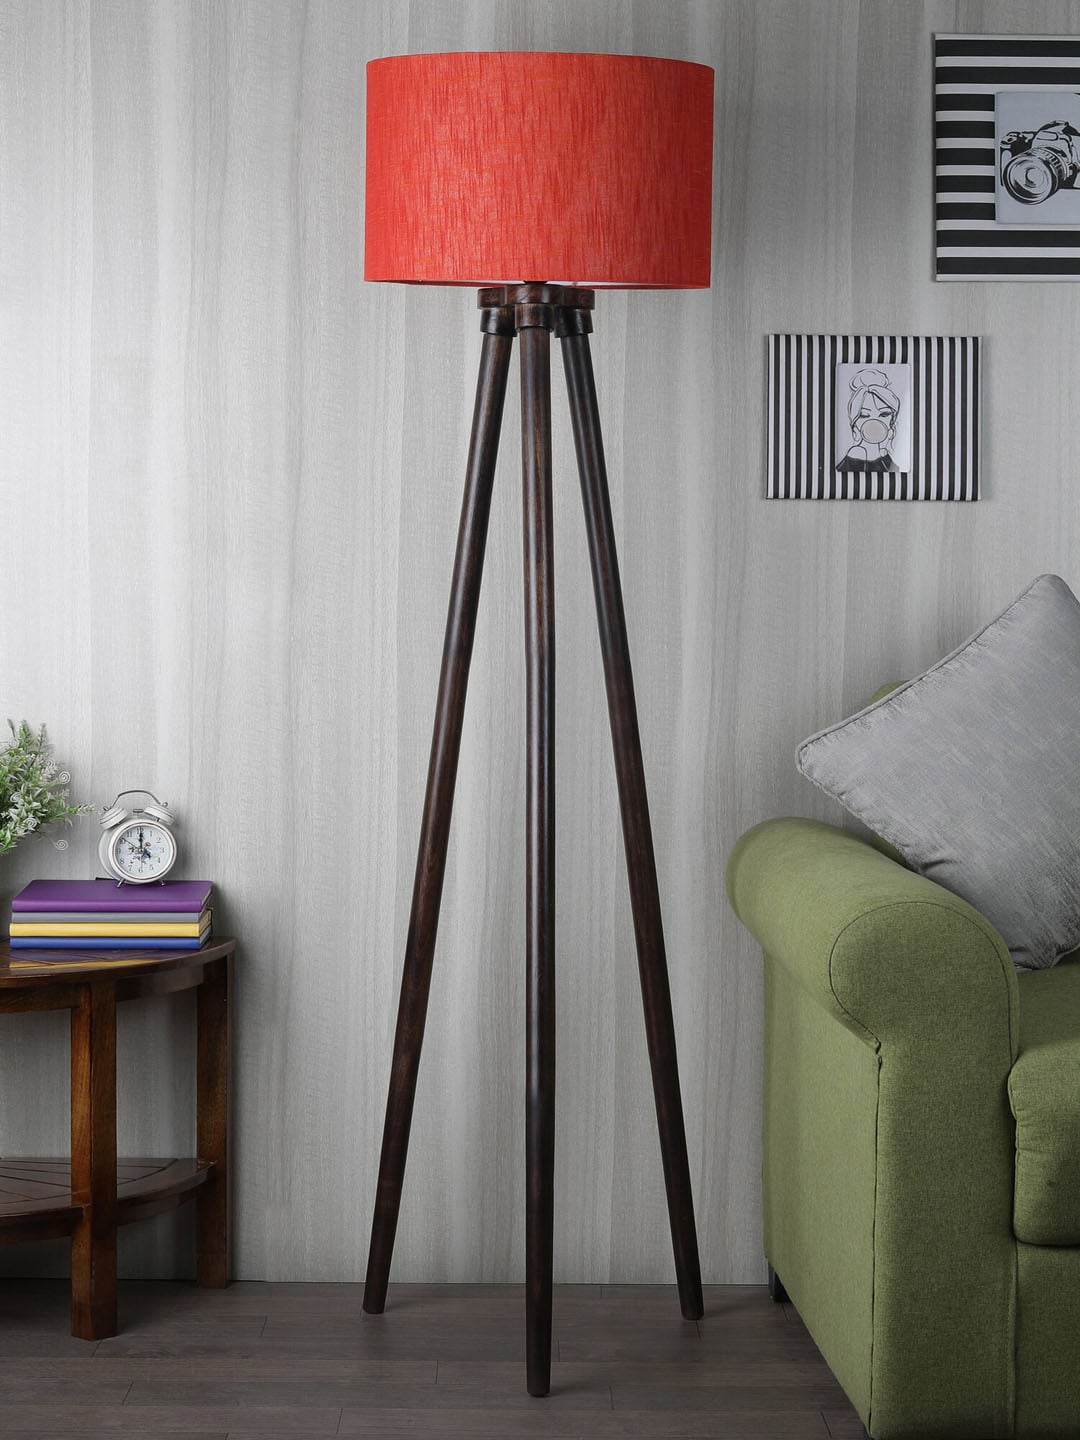 SANDED EDGE Red Frustum Tripod Floor Lamp With Cotton Shade Price in India